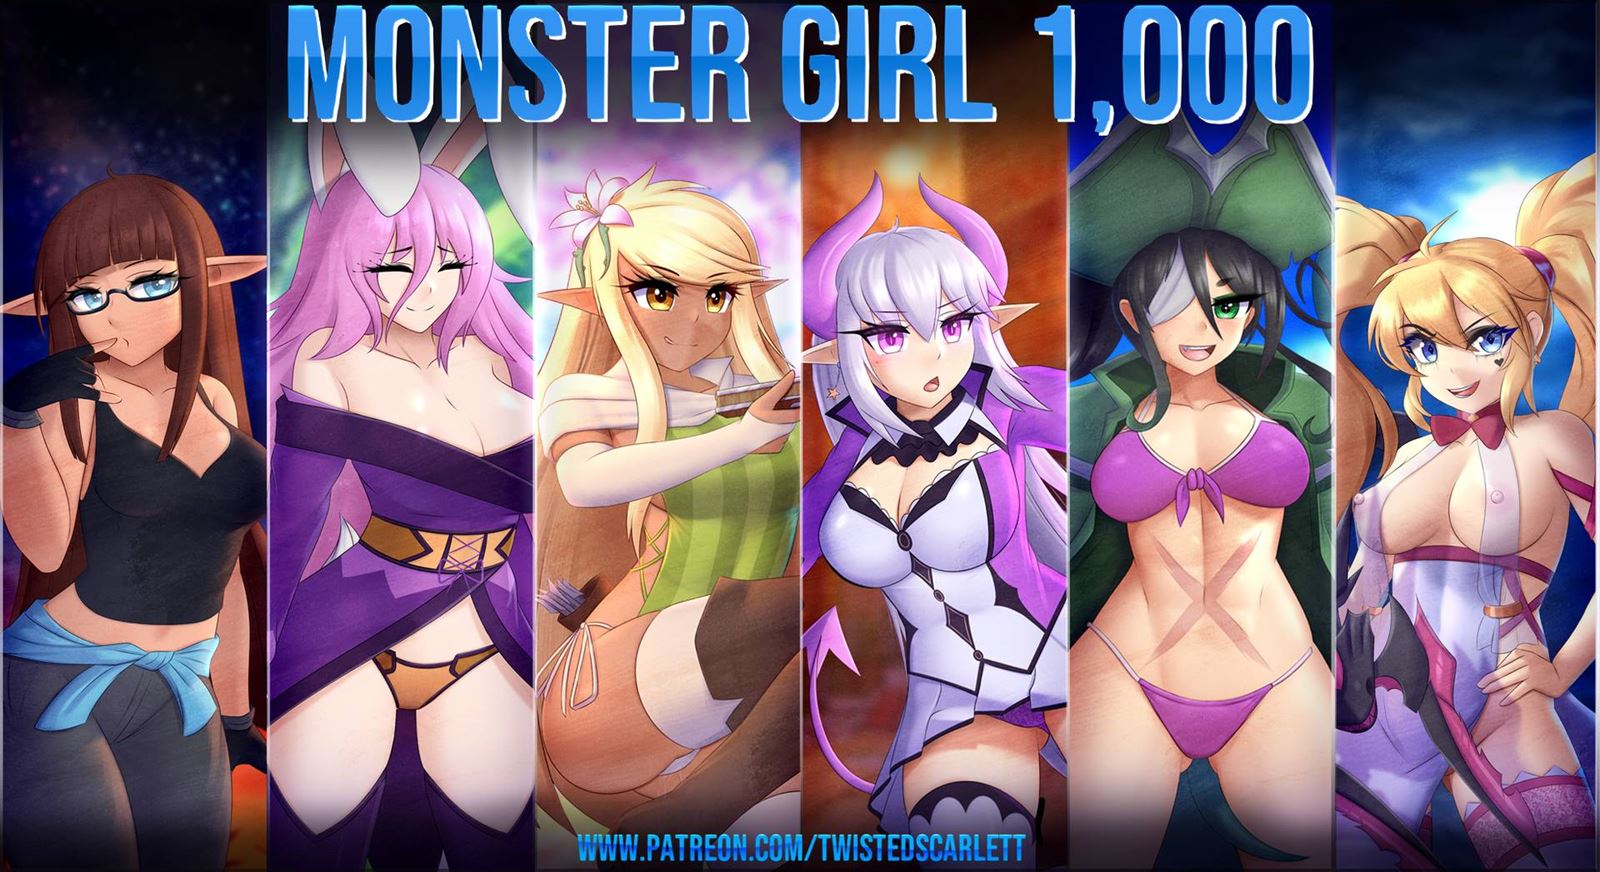 Monster Girl 1,000 porn xxx game download cover